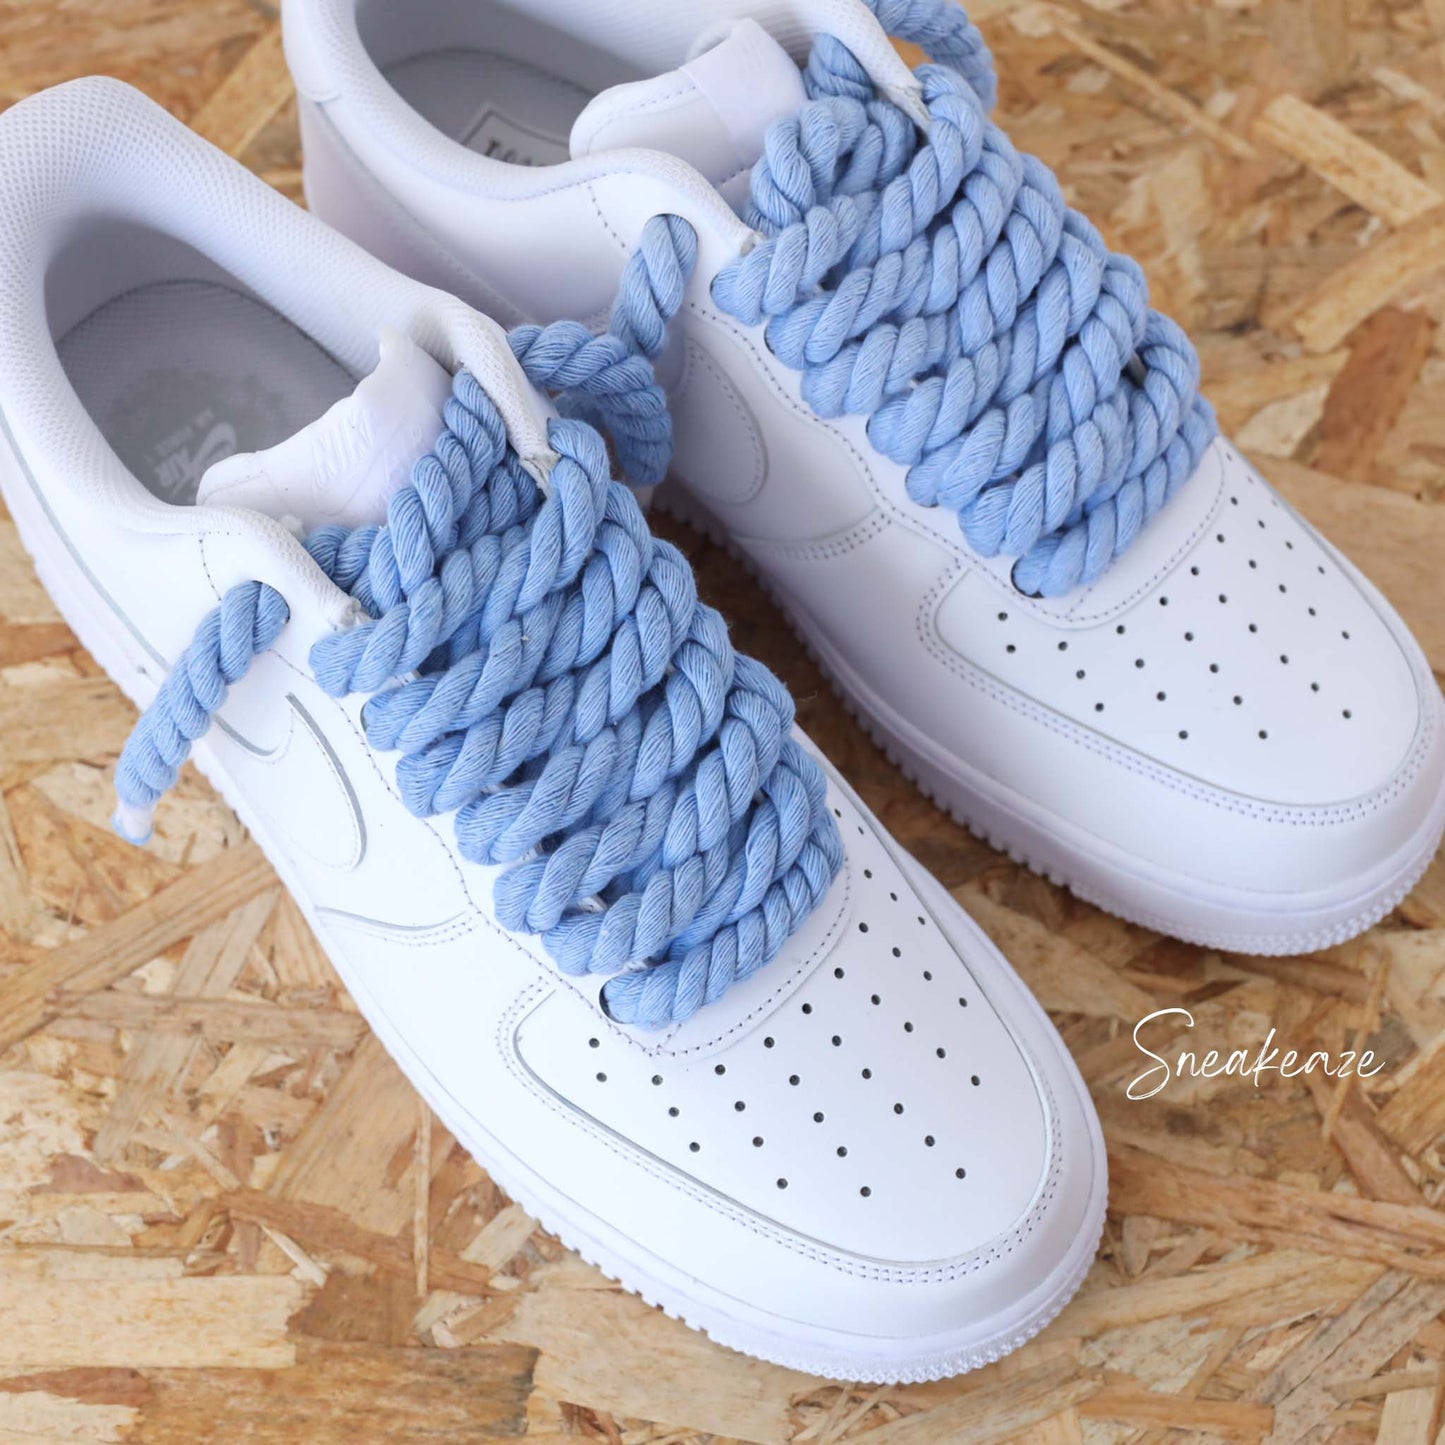 Ropes laces - Air Force 1 custom